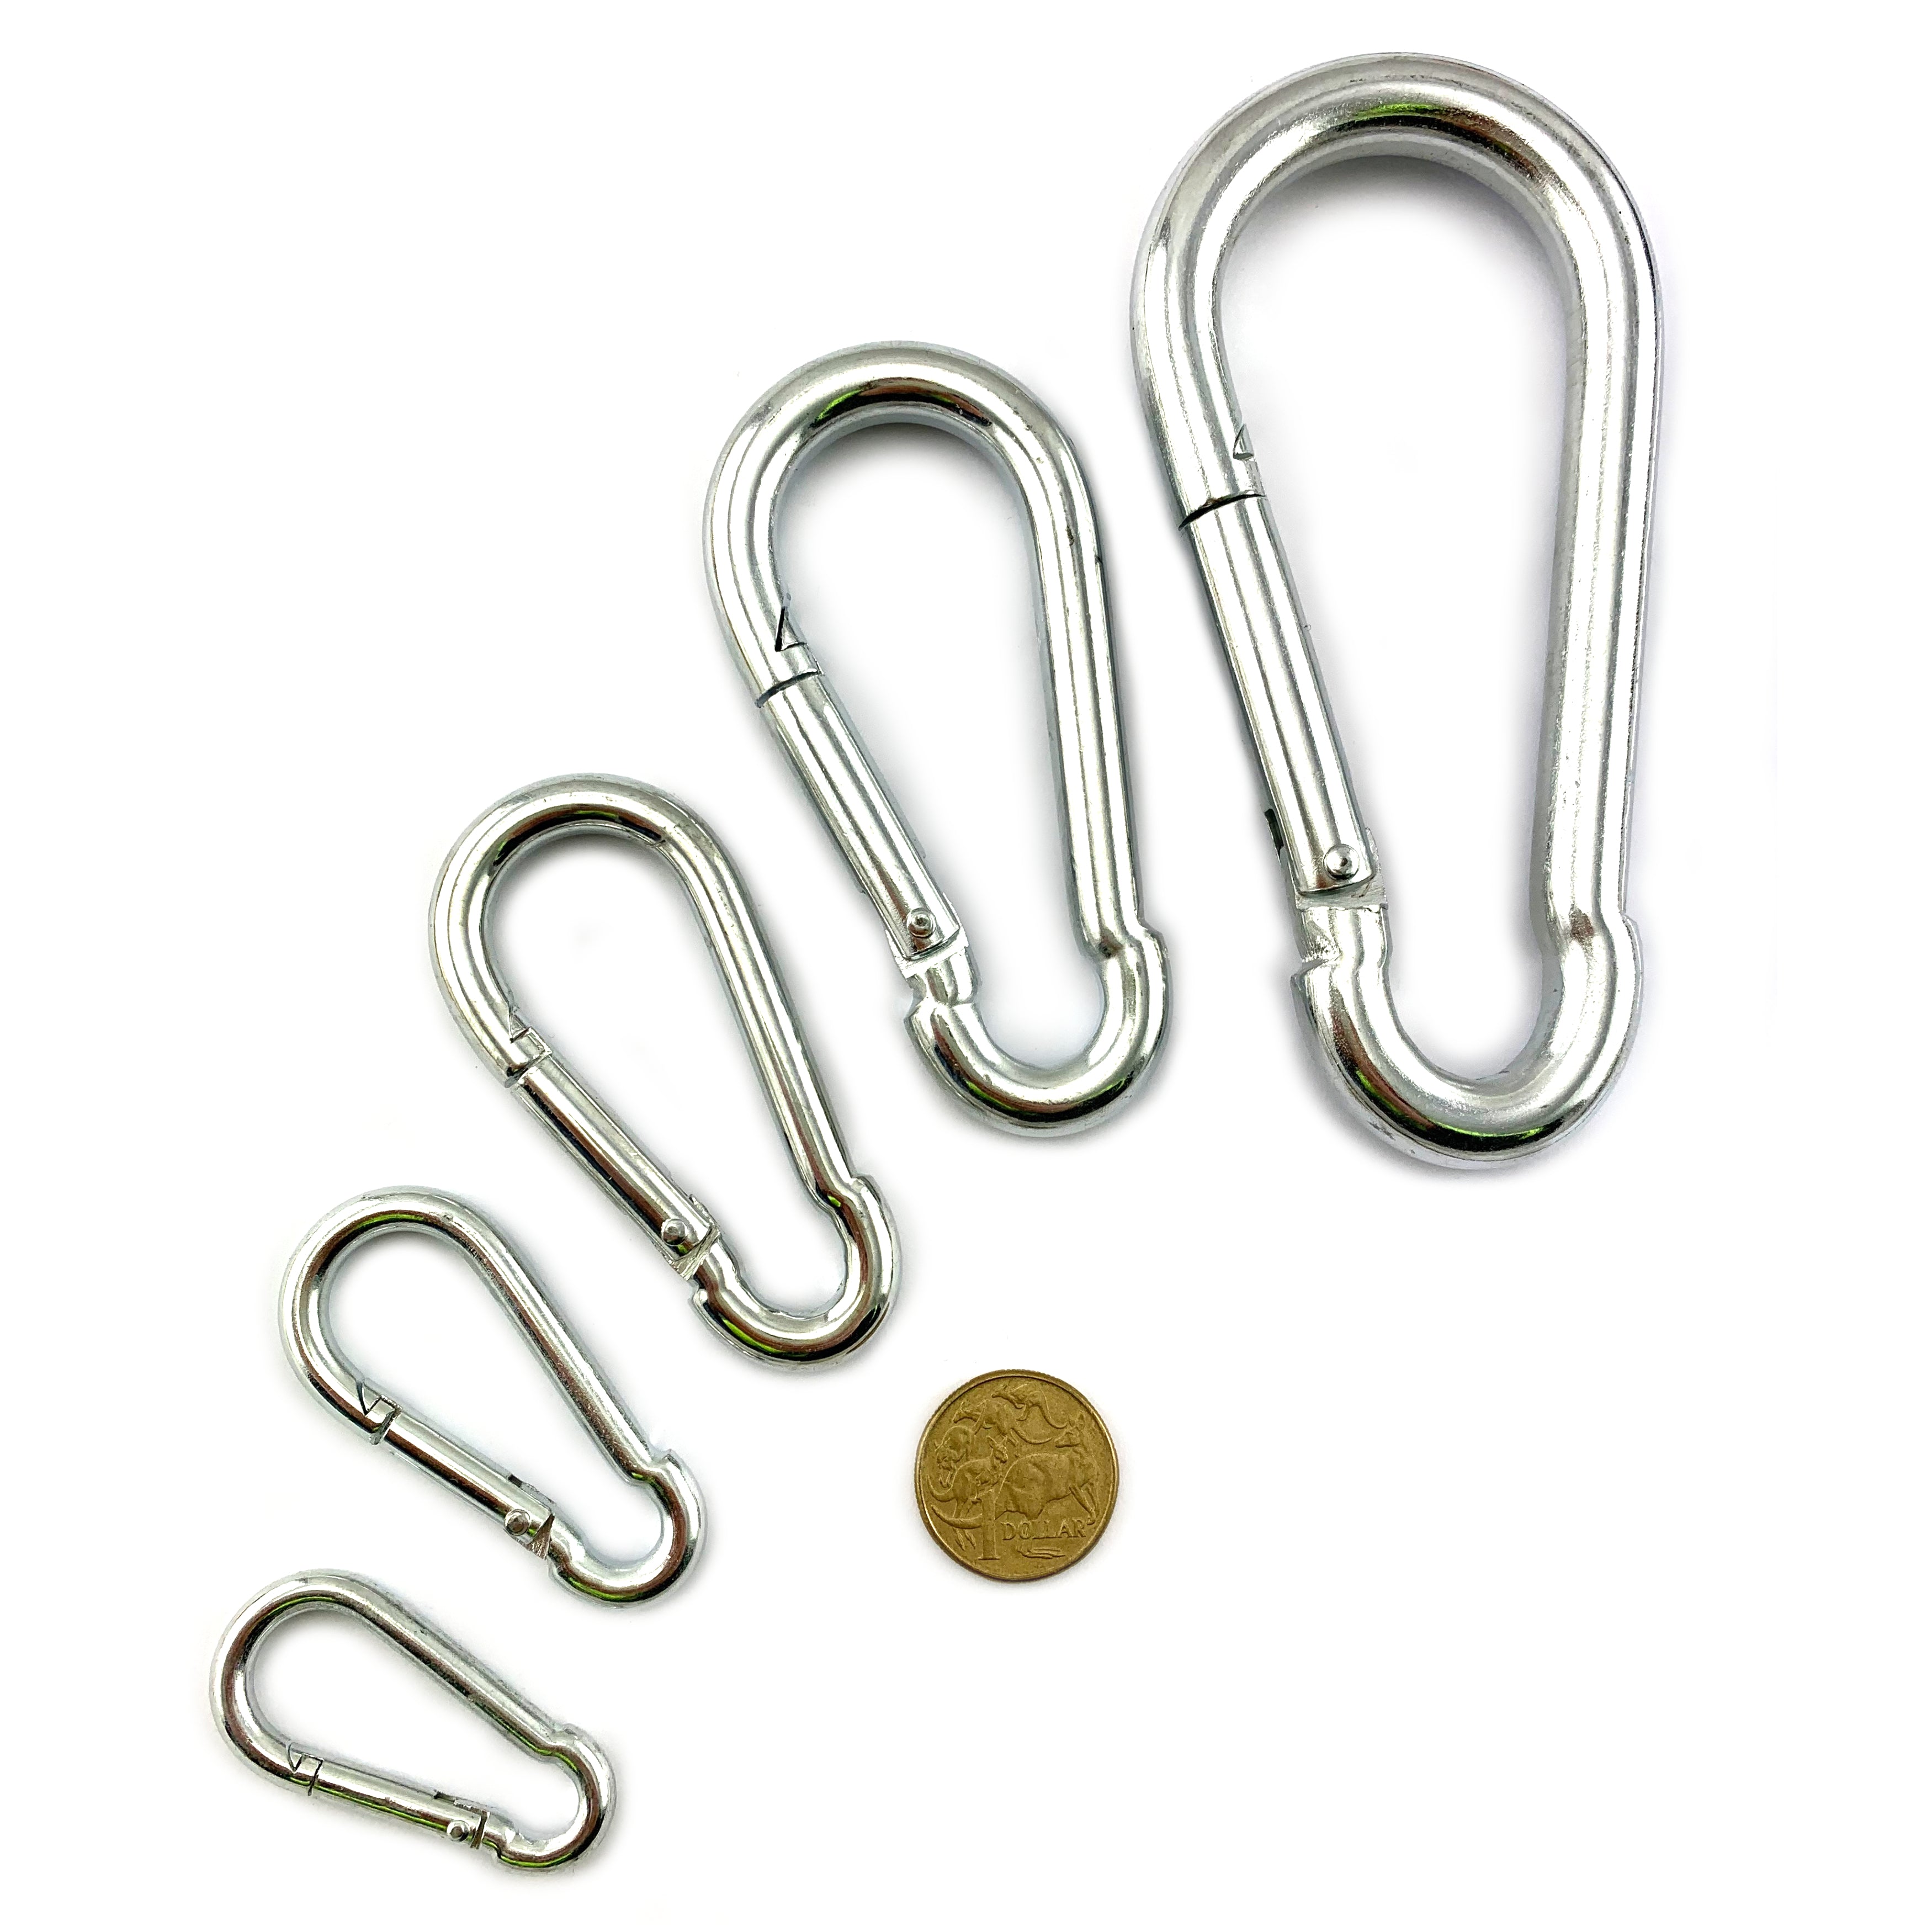 Snap hooks in zinc plated steel. Various sizes available. Shop hardware online.